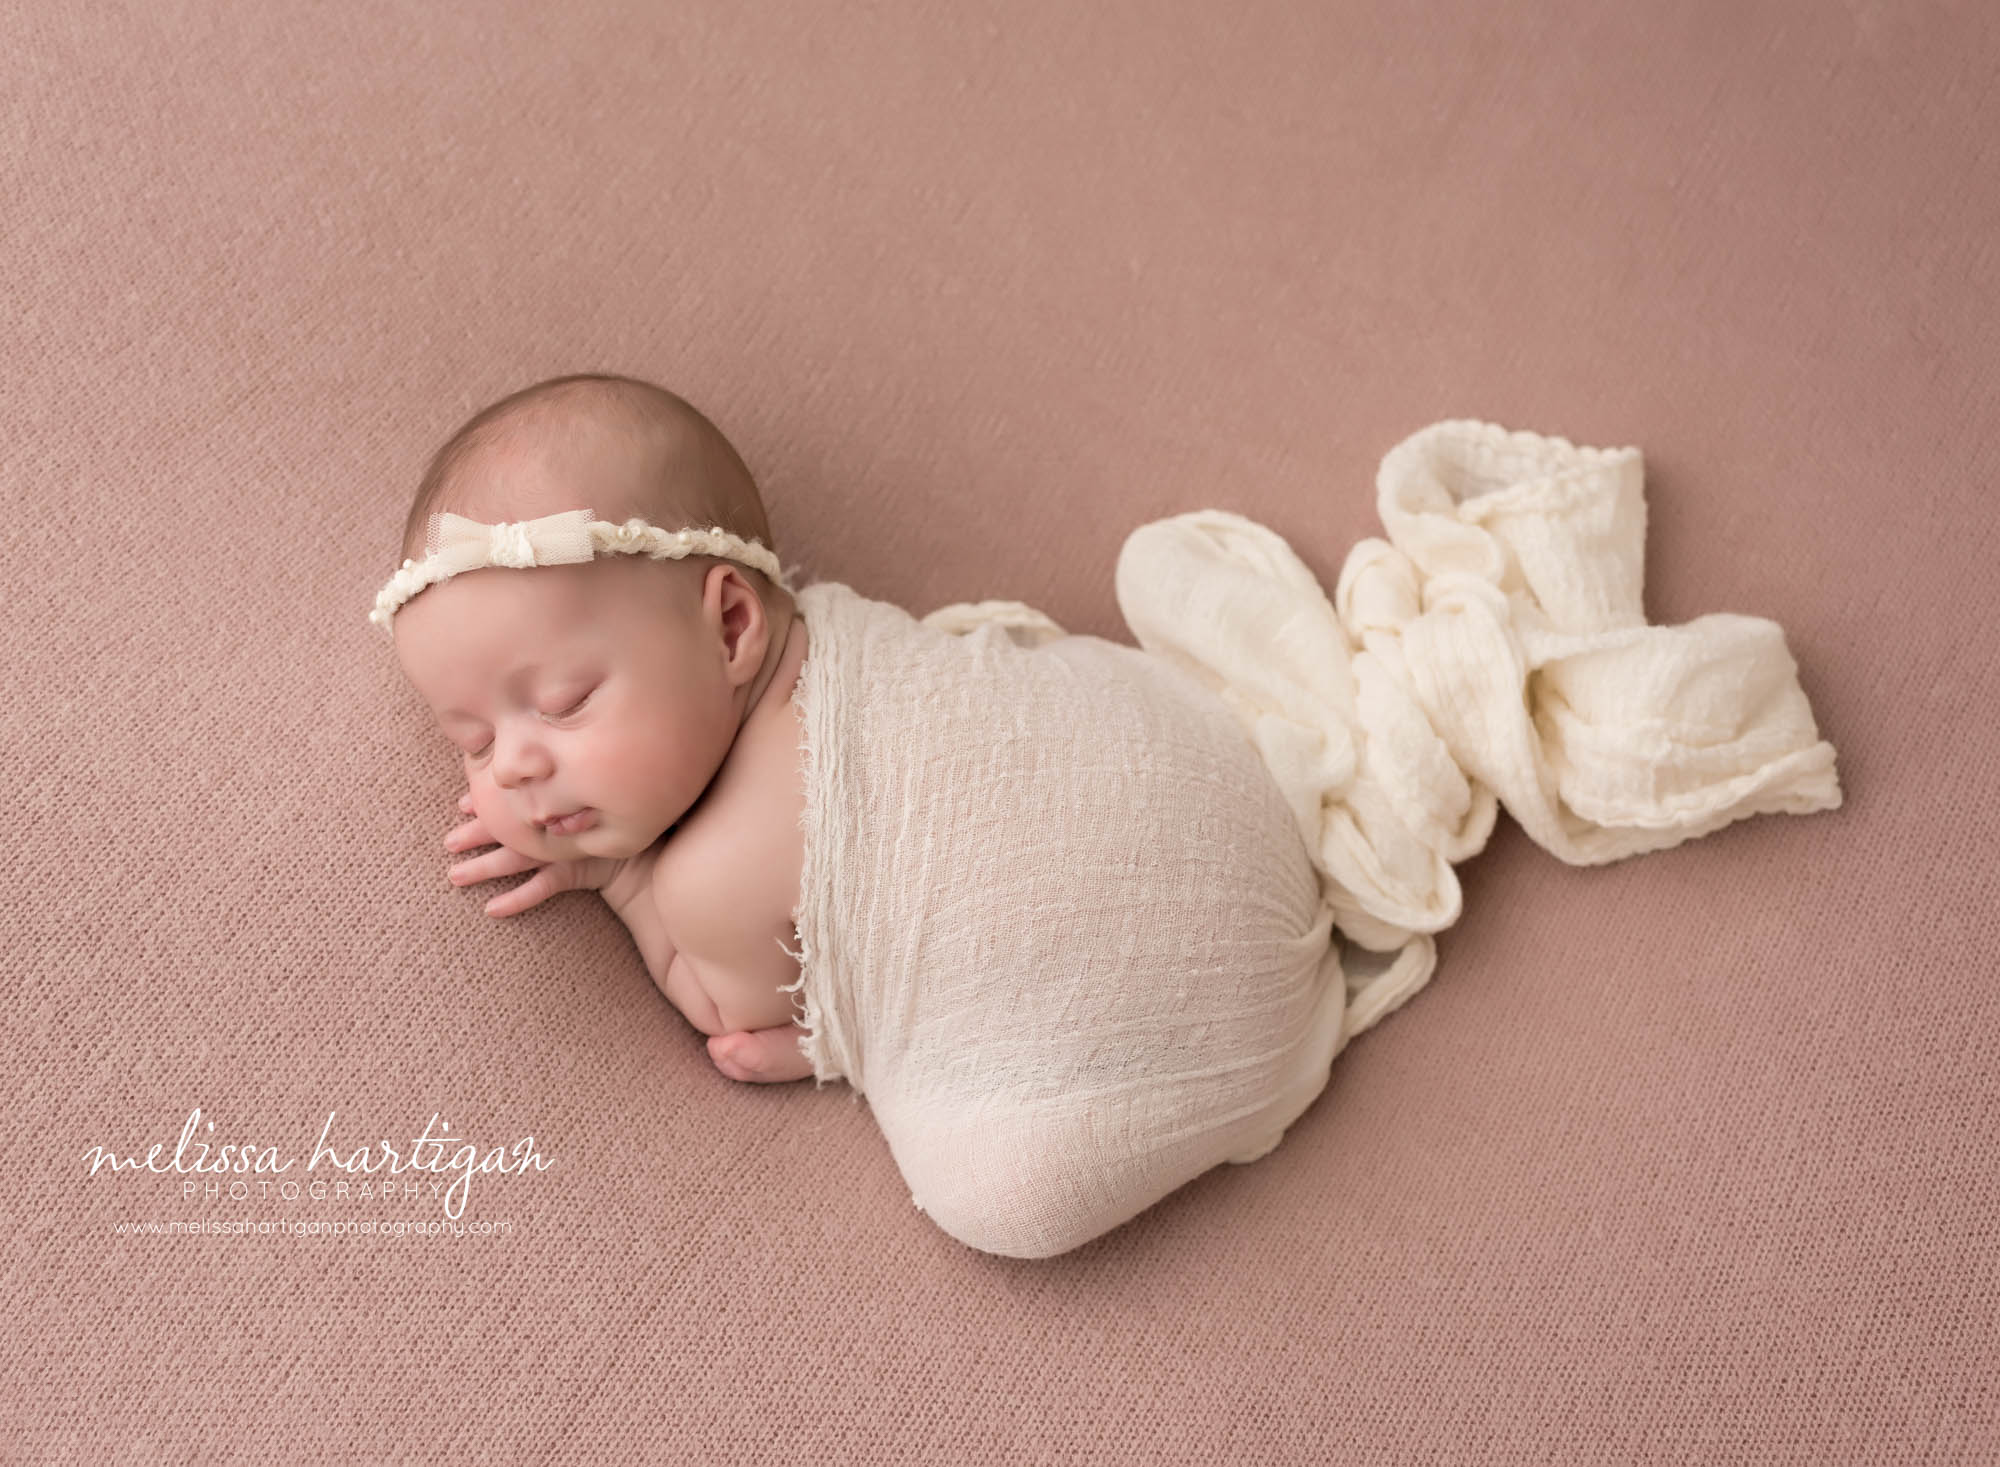 newborn baby girl posed on rose mauve colored backdrop with cream layer draped over back wearing cream headband